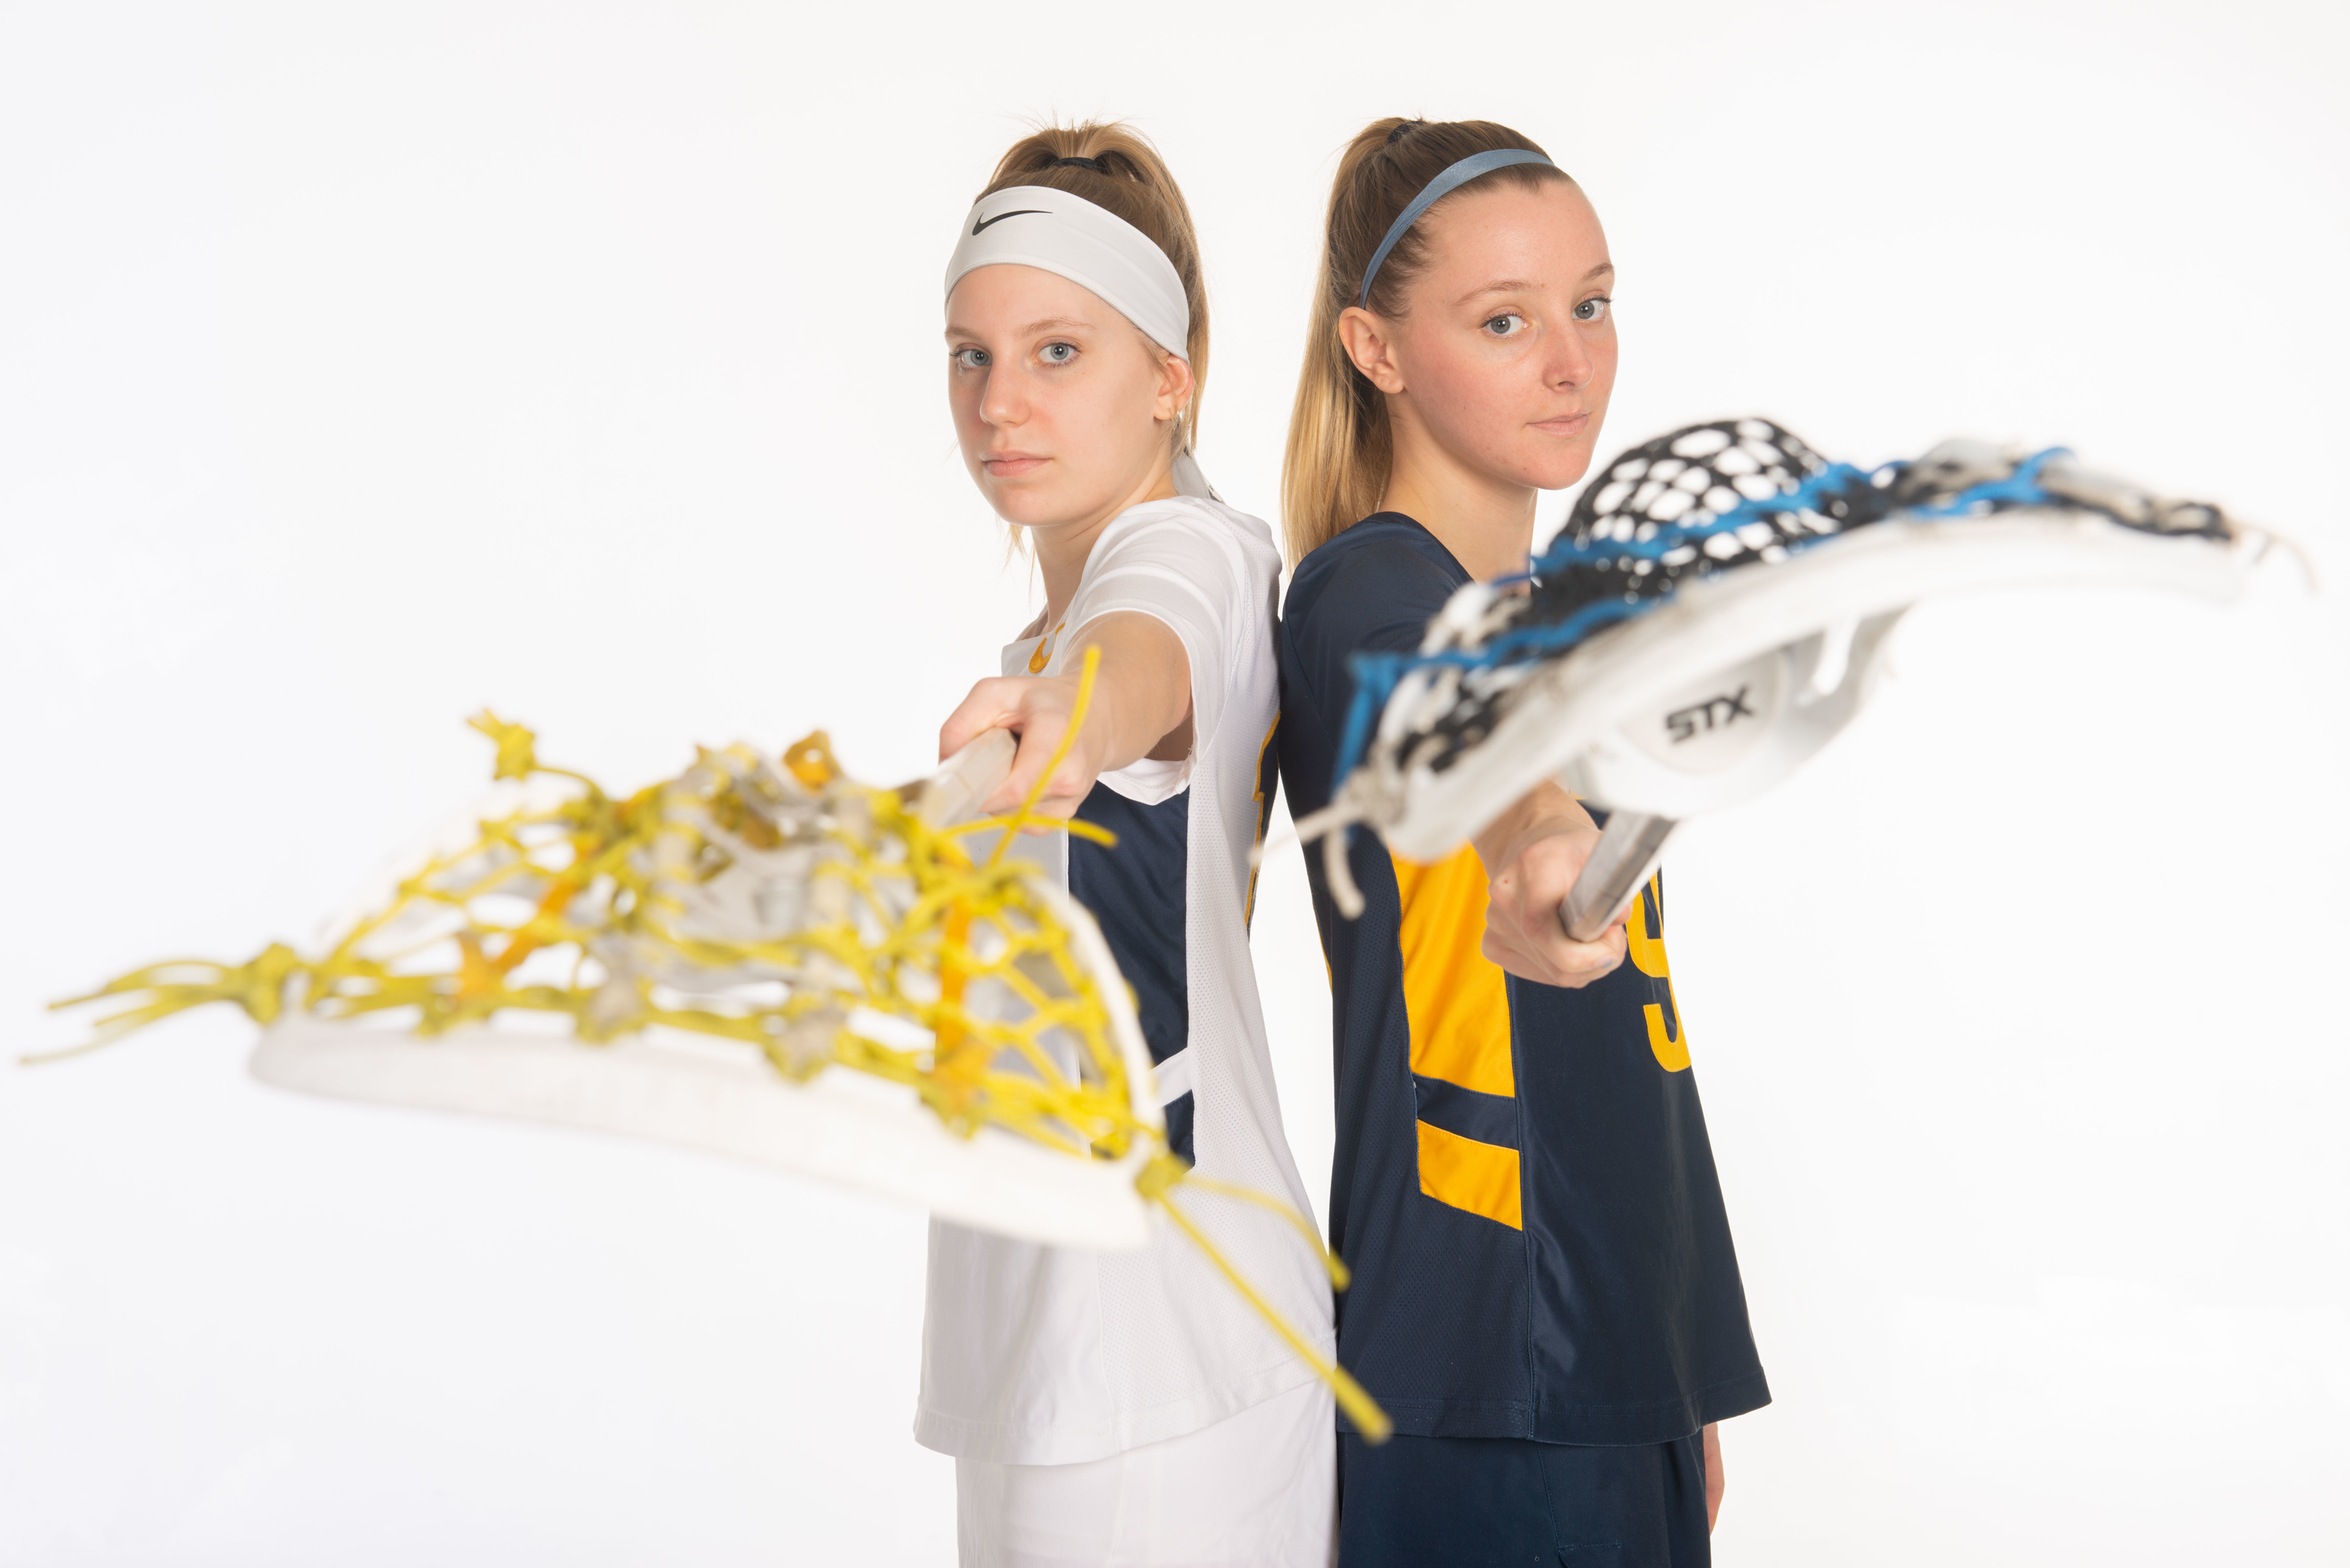 Women's Lacrosse Wins Fourth Straight on the Road